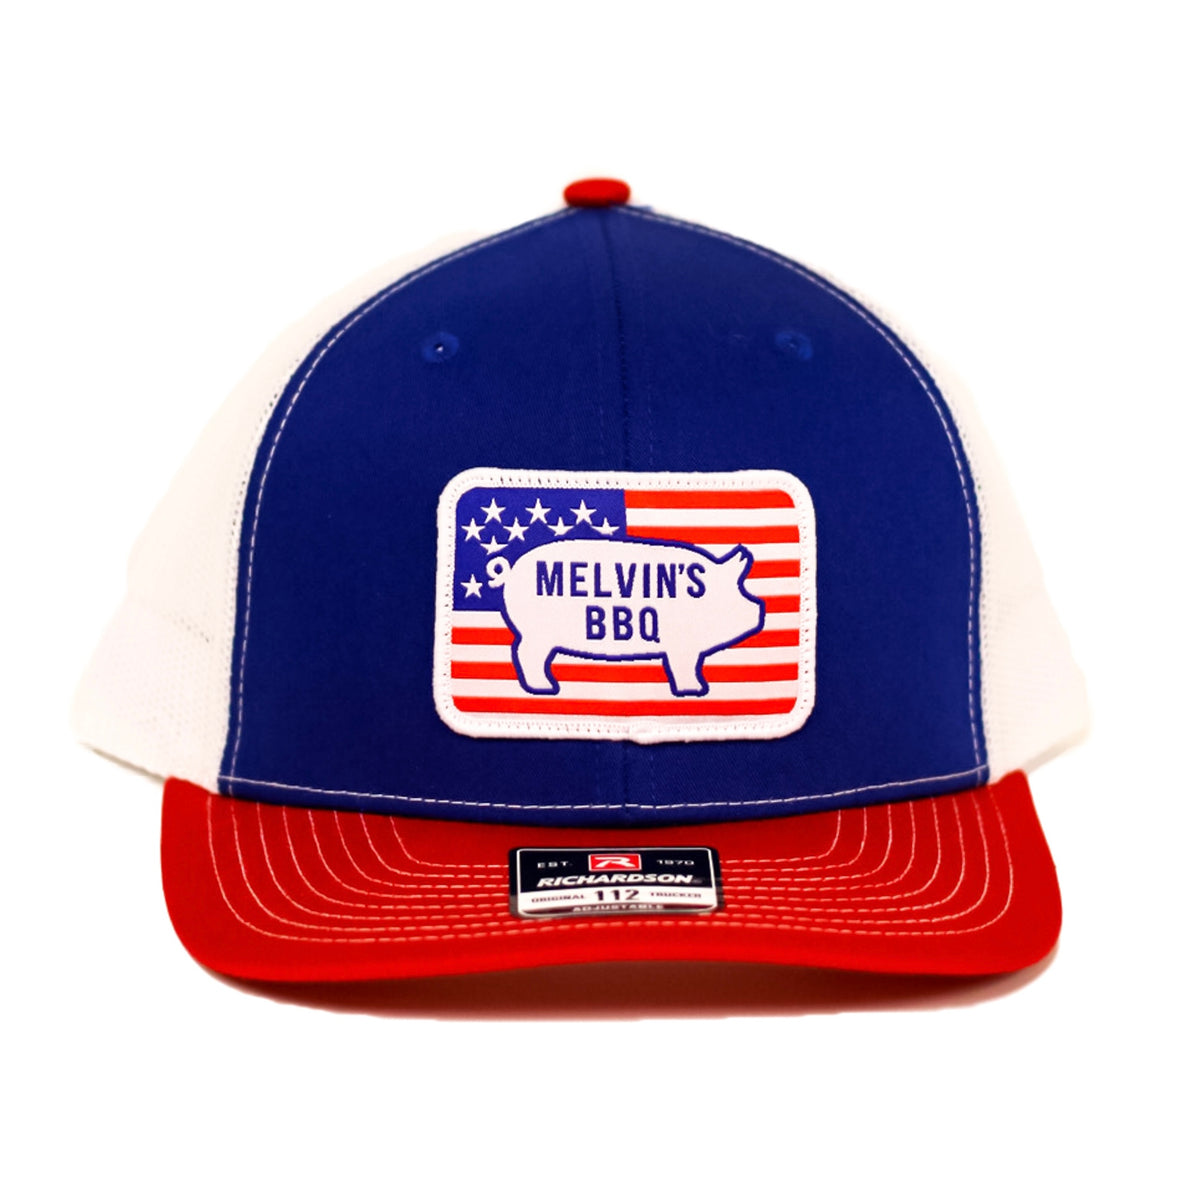 melvin's pig and american flag richardson patch hat